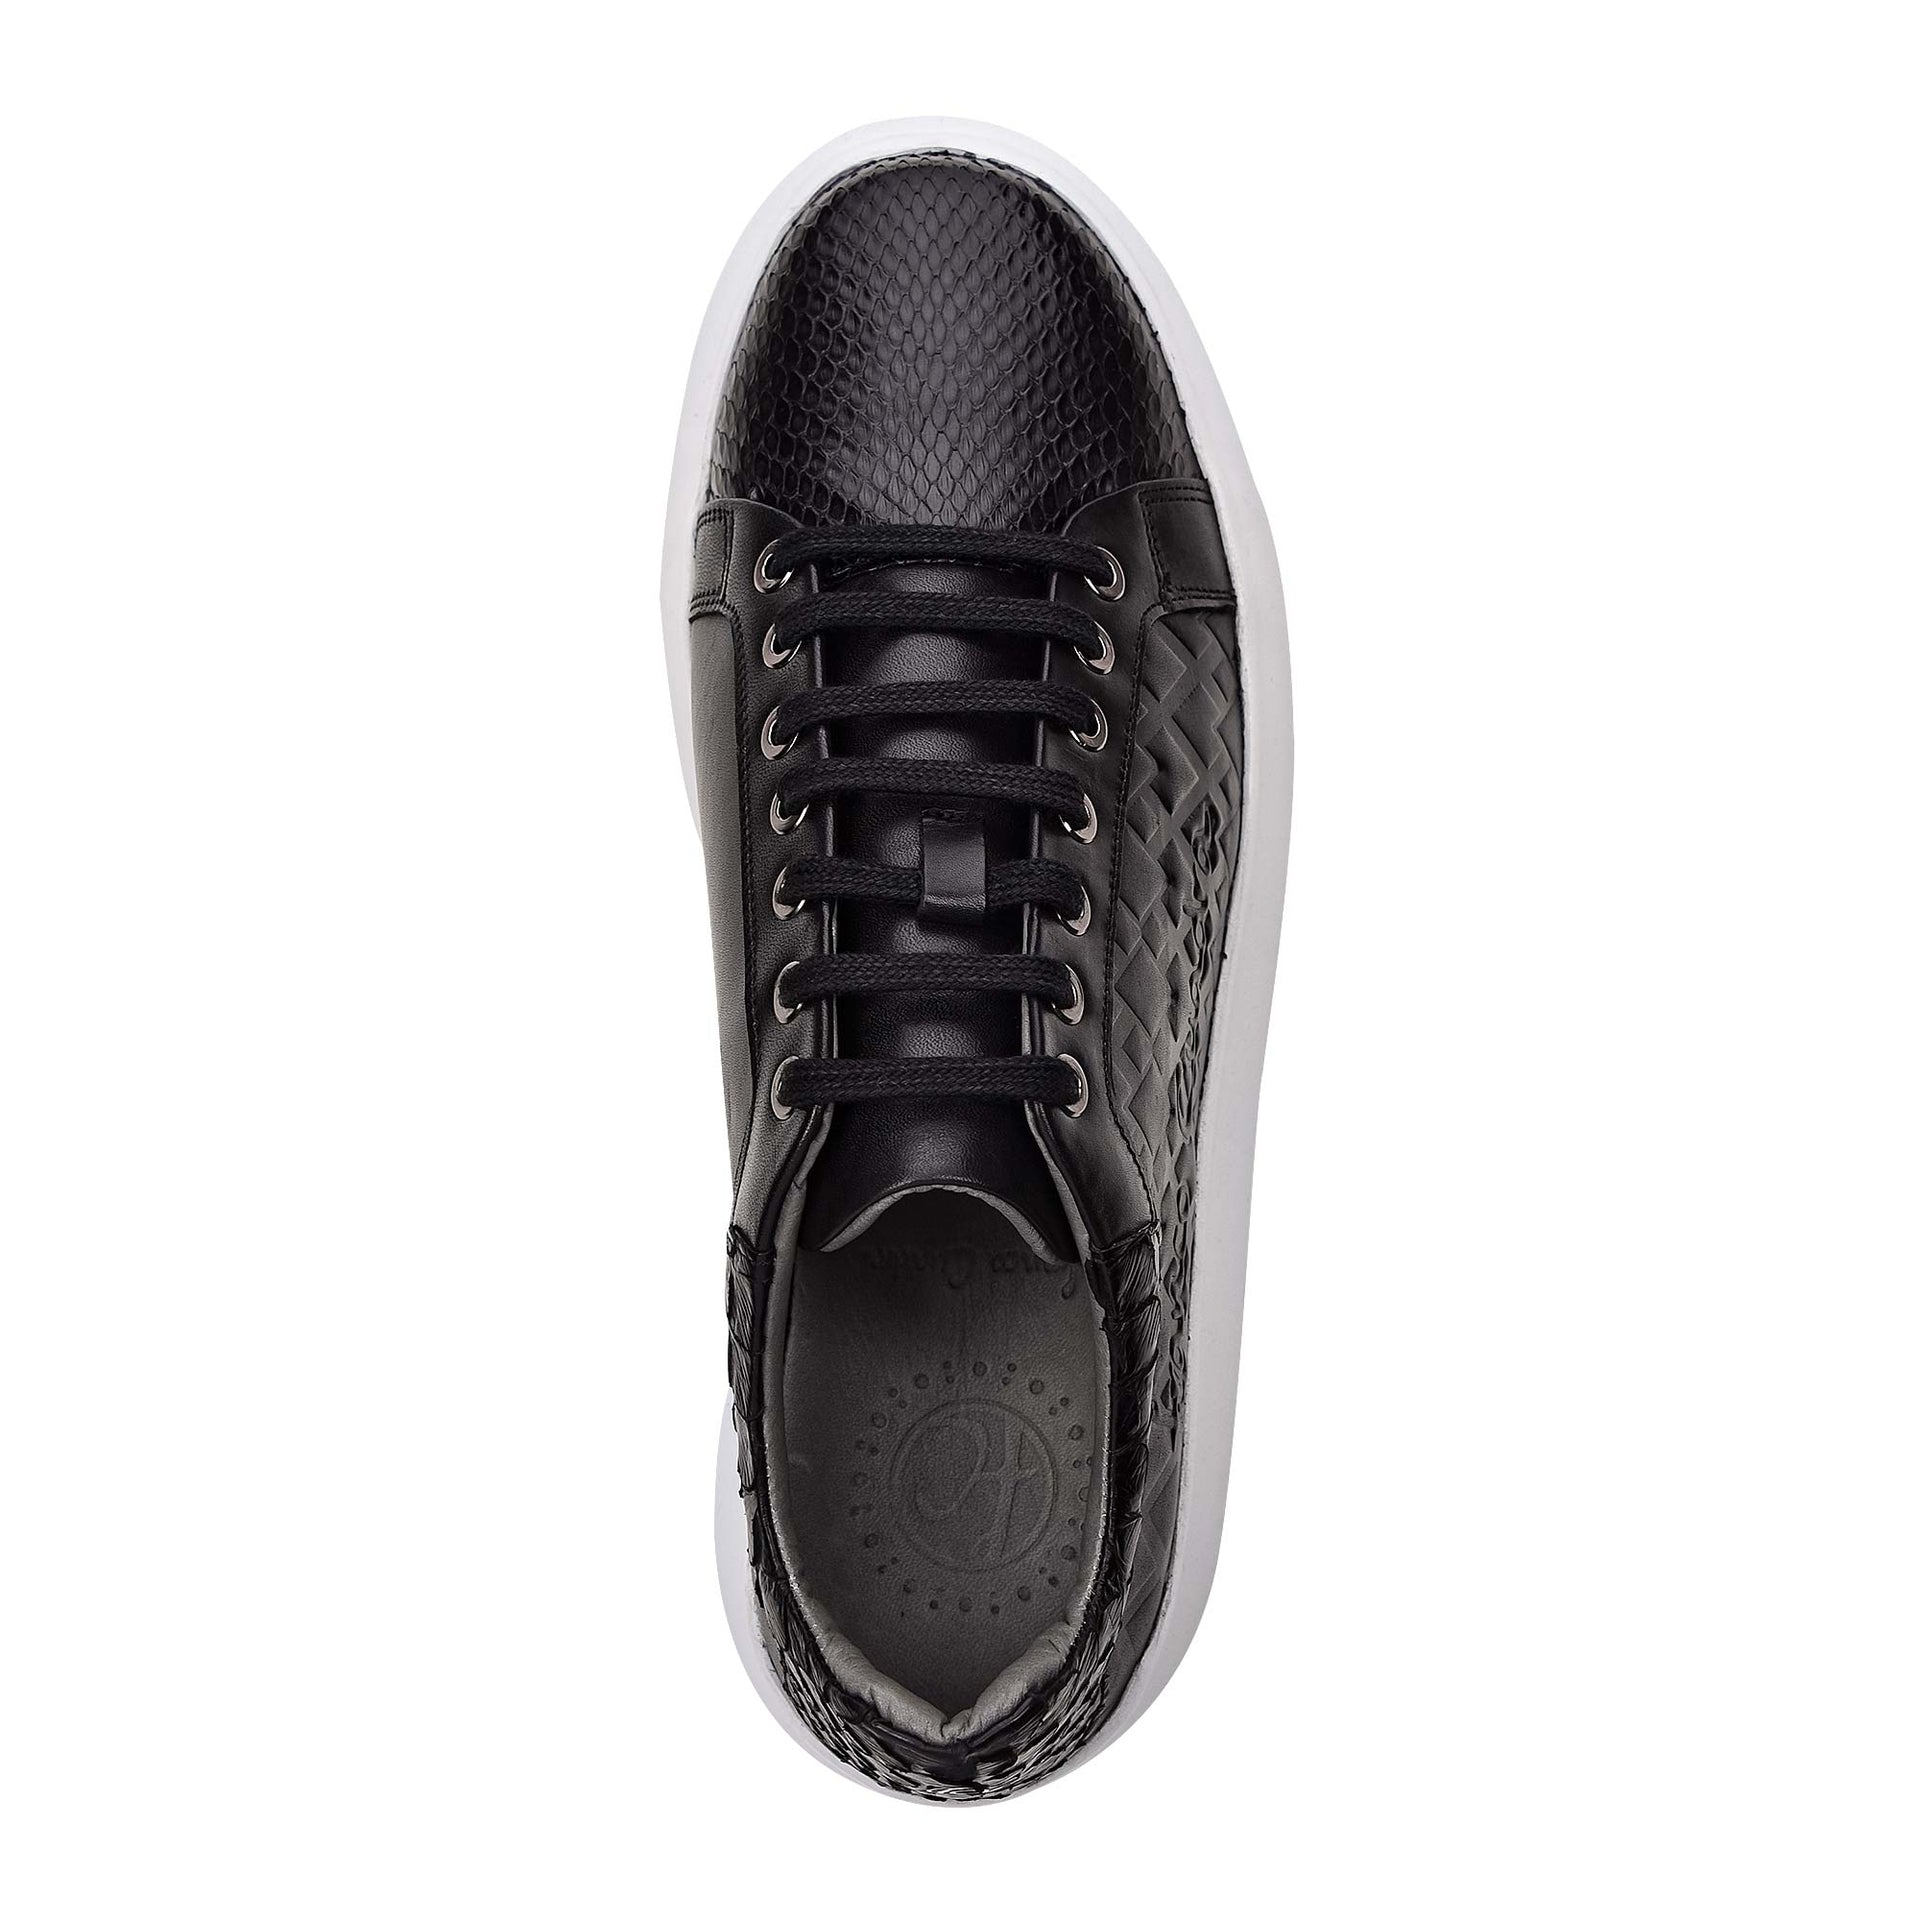 4P3PMTS - Cuadra black casual fashion python leather sneakers for women-Kuet.us